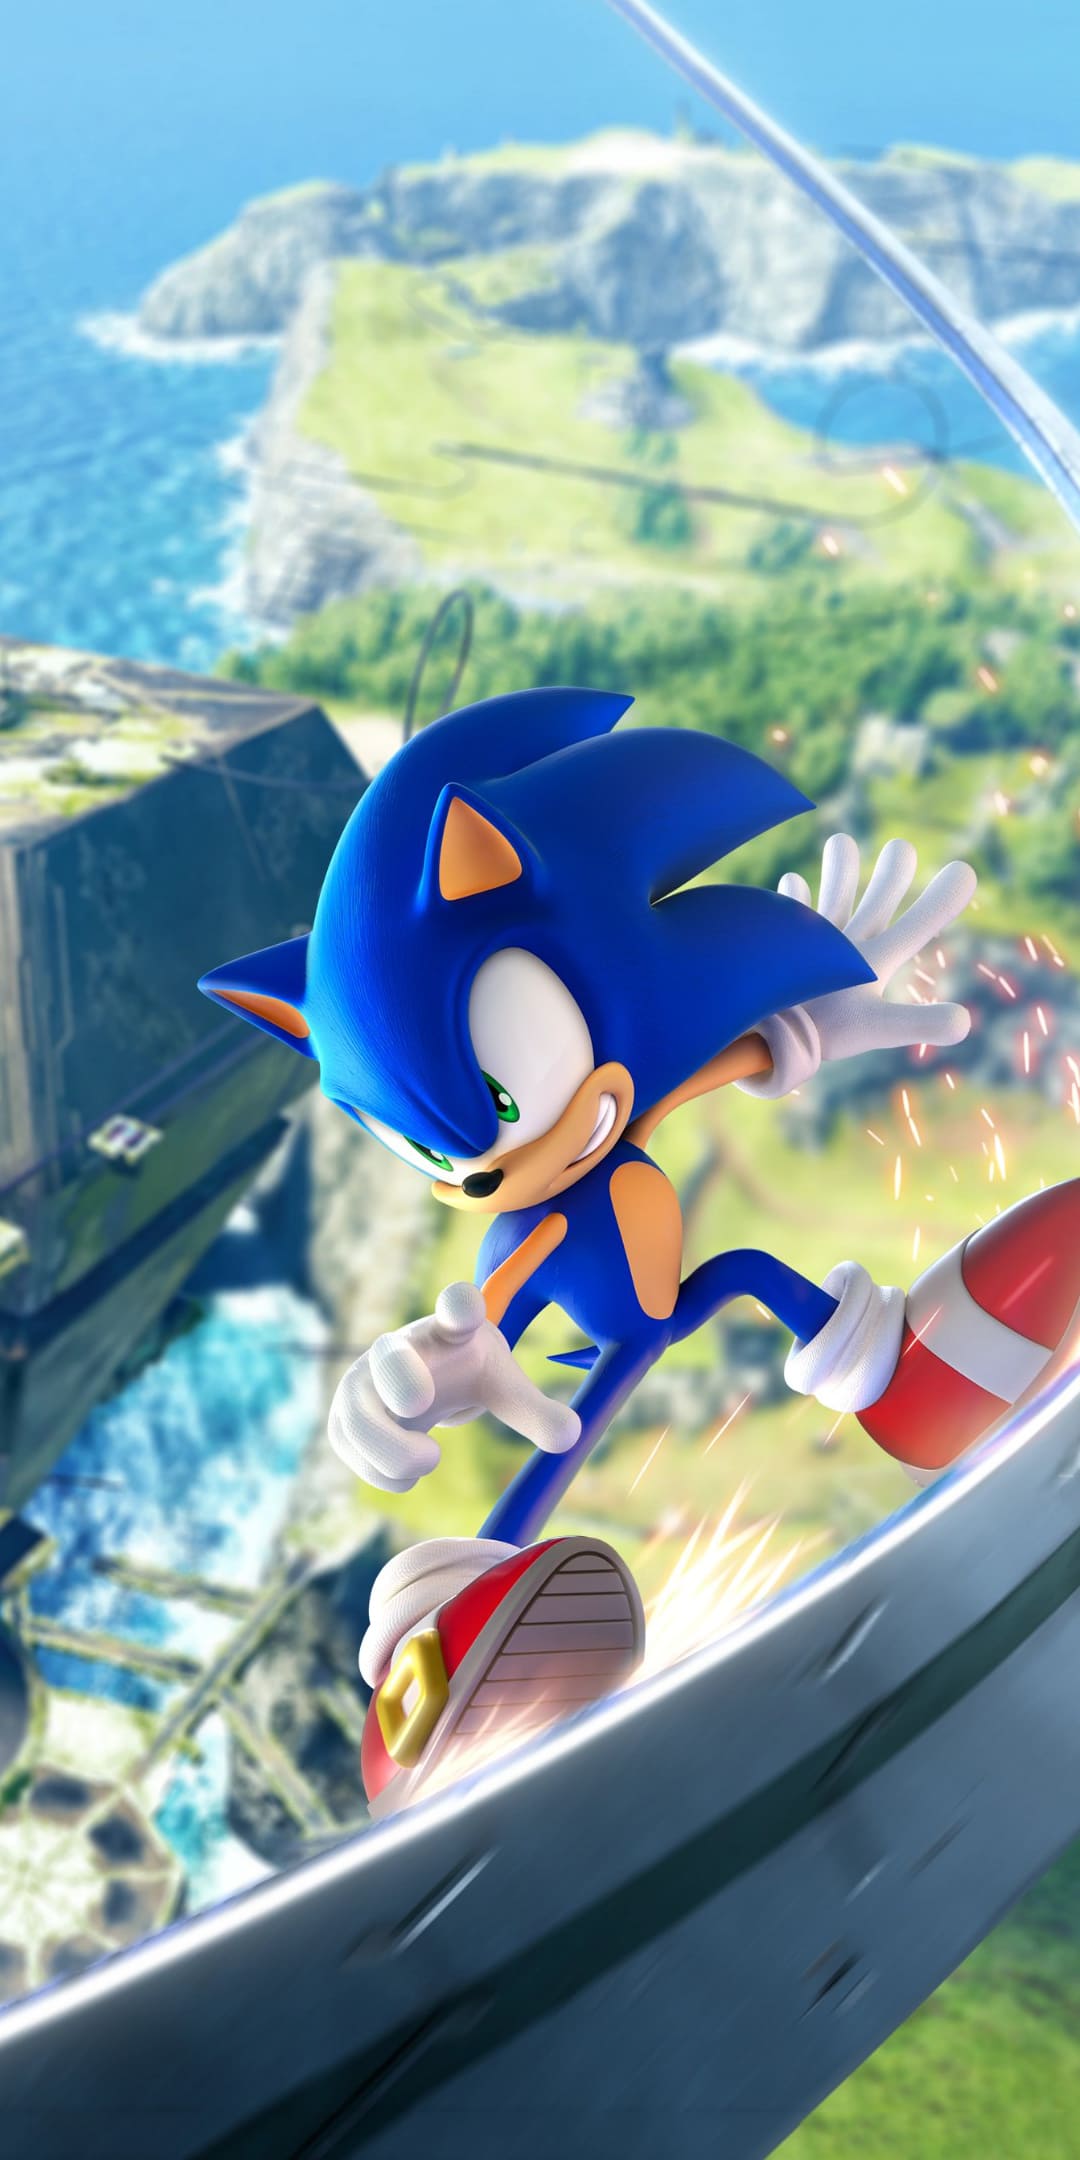 Sonic the hedgehog is flying over a city - Sonic